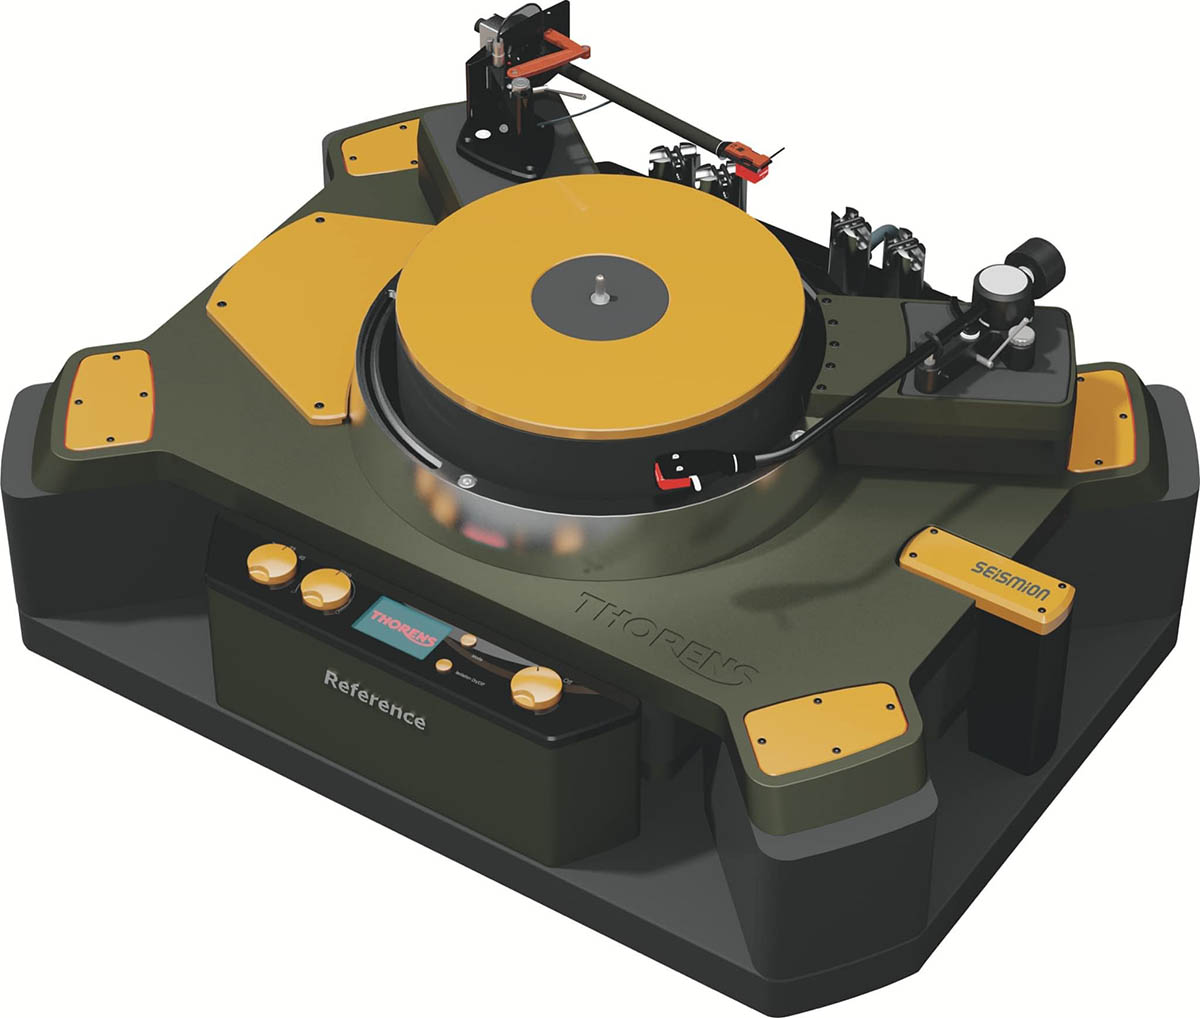 nghenhin_vietnam_chi_tiet_cong_nghe_ky_thuat_mam_than_thorens_new_reference_2023_turntable_h9.jpg (112 KB)